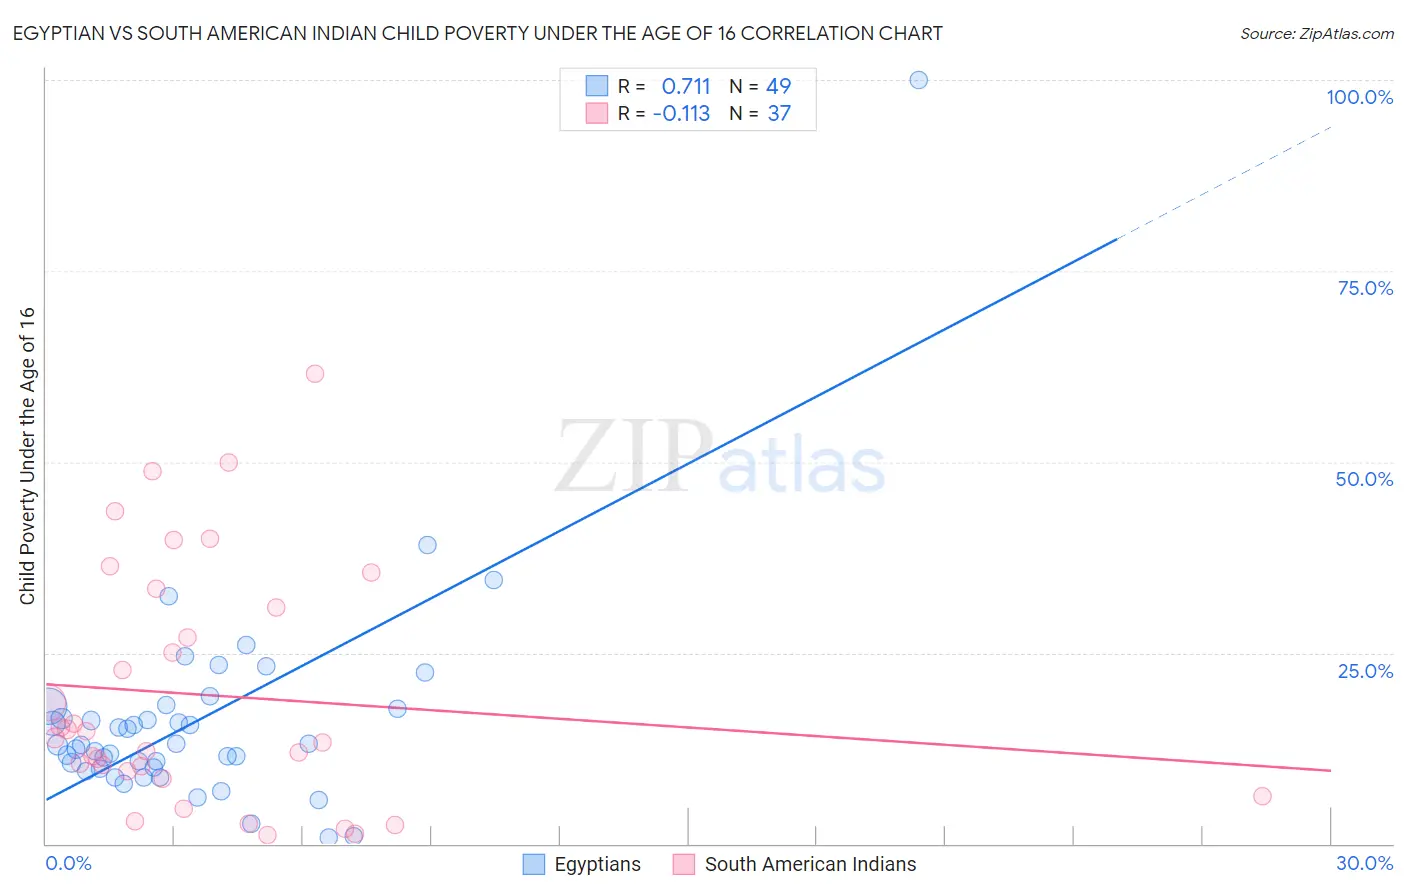 Egyptian vs South American Indian Child Poverty Under the Age of 16